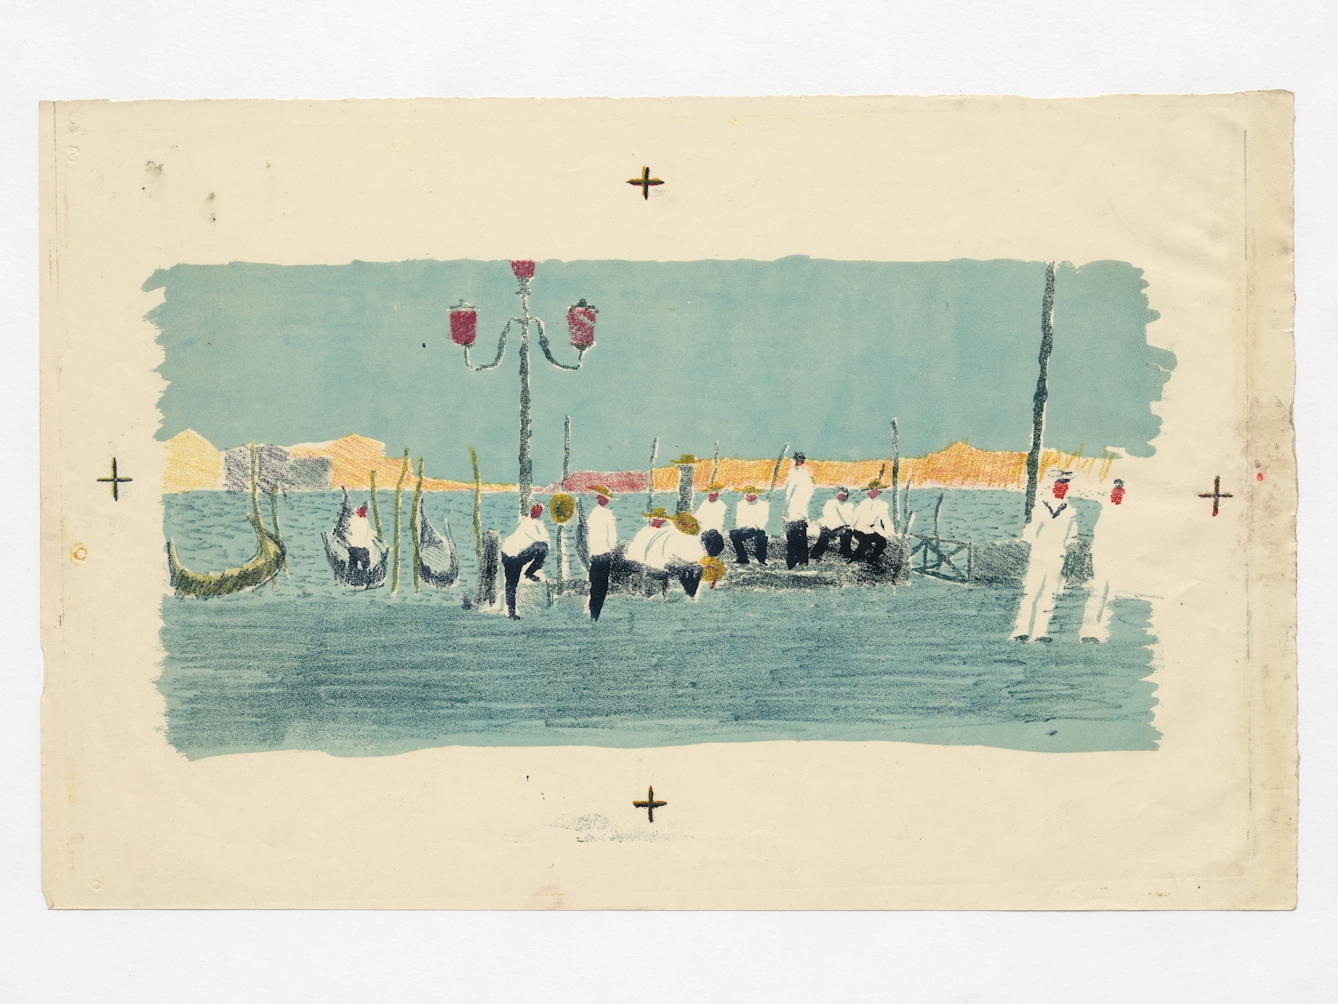 Photograph of a colour, painted artwork. The scene shows a series of gondola's with many of their gondoliers standing around chatting. The style is impressionistic and is made up of blues, yellows, whites and reds.